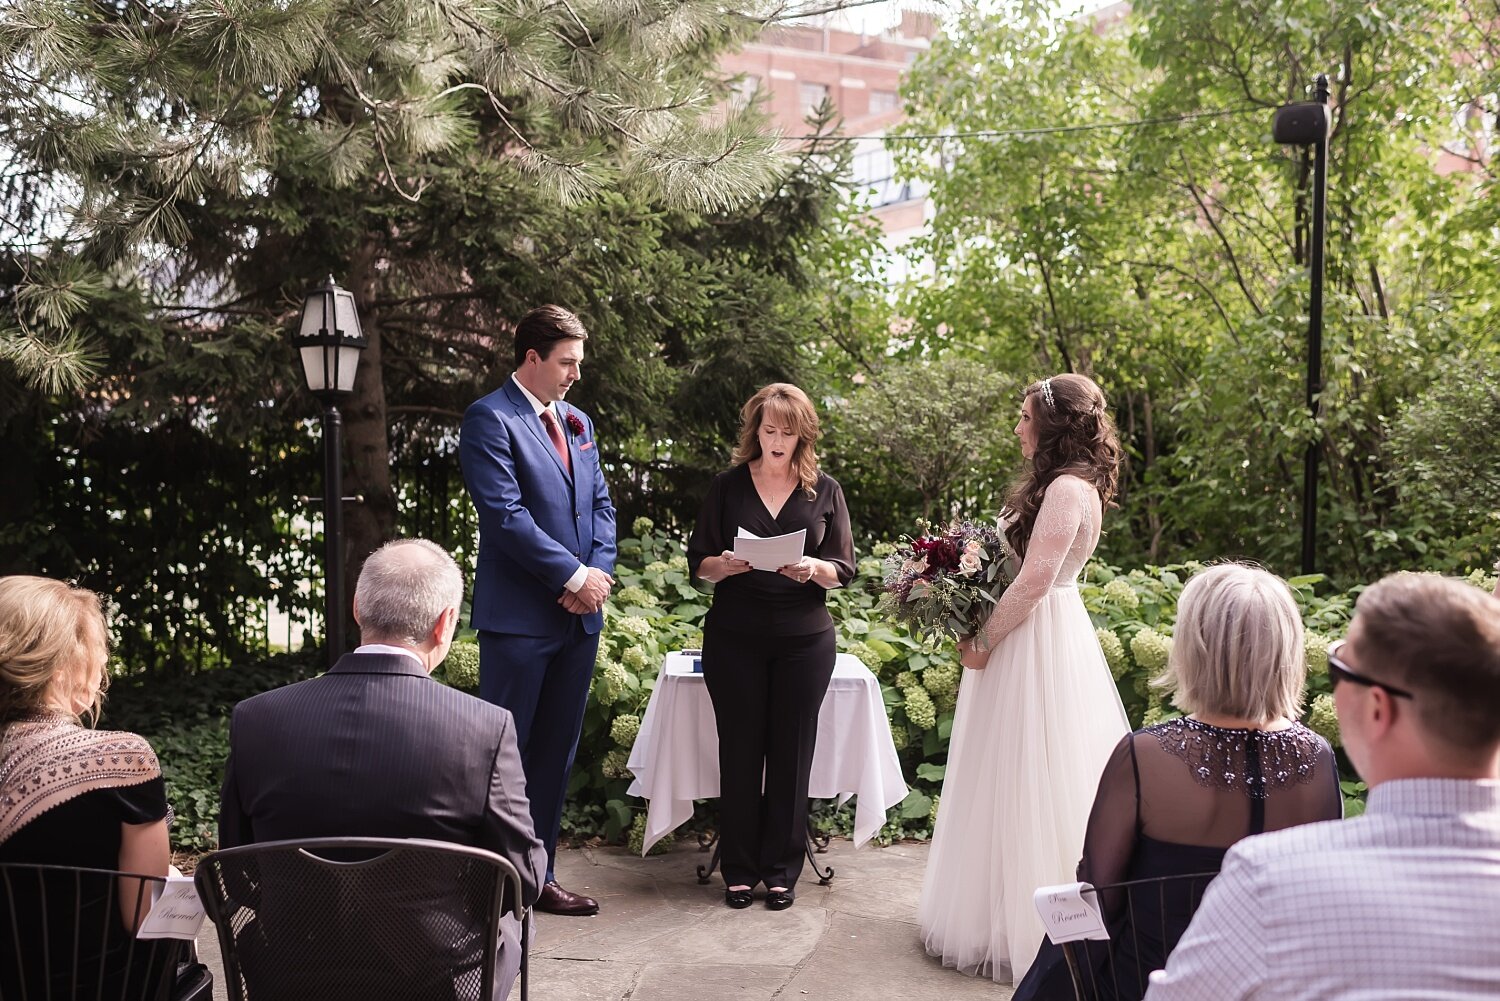  A couple listening to their wedding officiant during their outdoor wedding ceremony.  